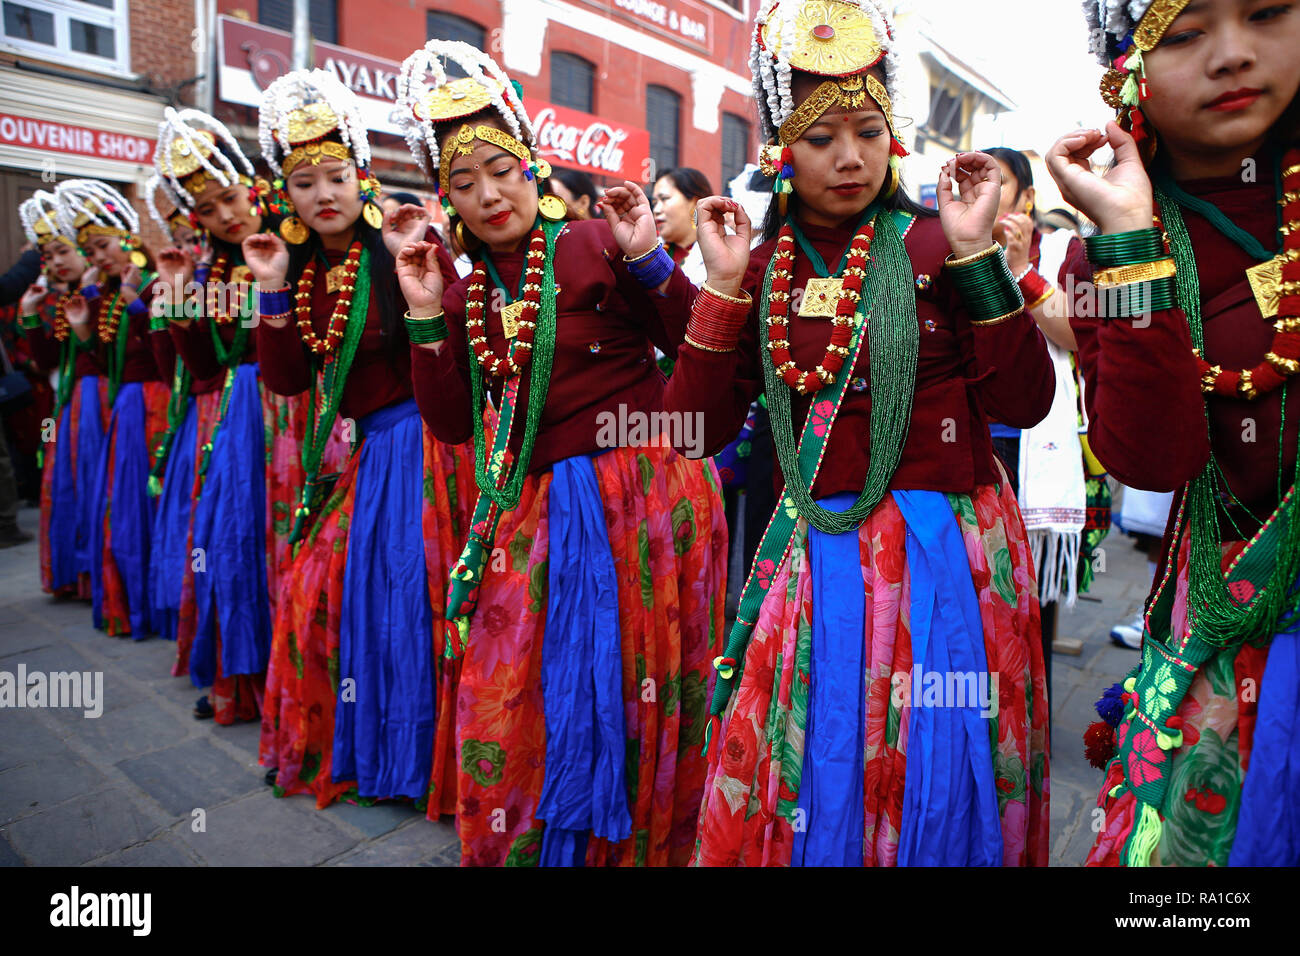 Nepalese girls from ethnic Gurung community in traditional attire dance as they take part in parade to mark their New Year also known as Tamu Losar. The indigenous Gurungs, also known as Tamu, are celebrating the advent of the year of the deer. Stock Photo